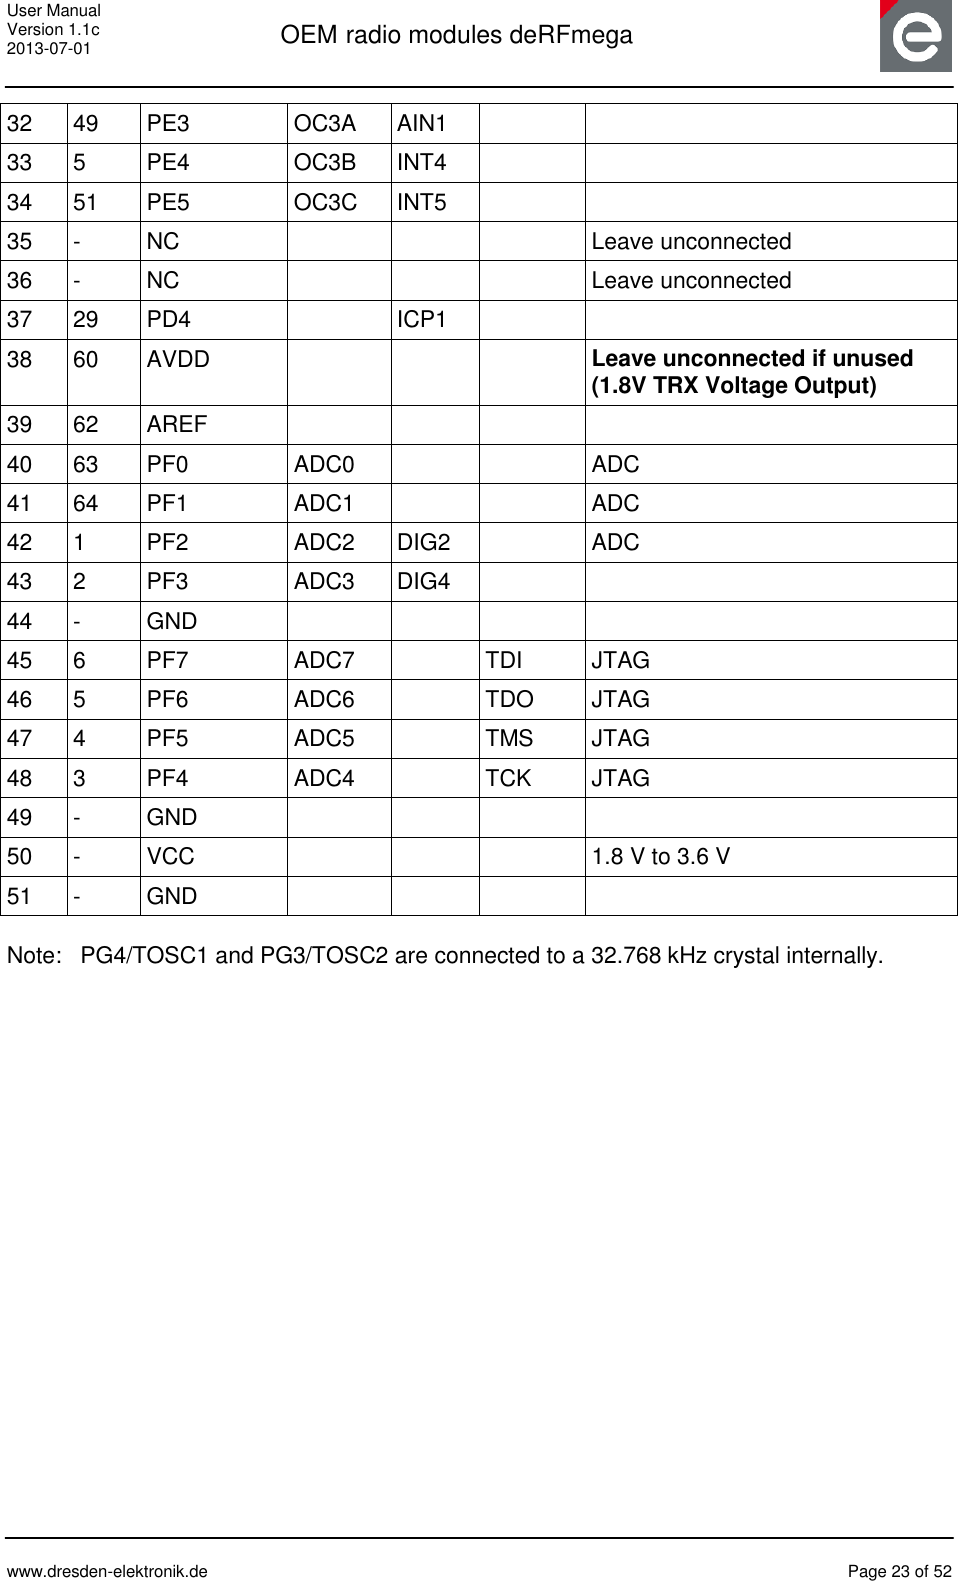 User Manual Version 1.1c 2013-07-01  OEM radio modules deRFmega      www.dresden-elektronik.de  Page 23 of 52  32 49 PE3 OC3A AIN1   33 5 PE4 OC3B INT4   34 51 PE5 OC3C INT5   35 - NC    Leave unconnected 36 - NC    Leave unconnected 37 29 PD4  ICP1   38 60 AVDD    Leave unconnected if unused (1.8V TRX Voltage Output) 39 62 AREF     40 63 PF0 ADC0   ADC 41 64 PF1 ADC1   ADC 42 1 PF2 ADC2 DIG2  ADC 43 2 PF3 ADC3 DIG4   44 - GND     45 6 PF7 ADC7  TDI JTAG 46 5 PF6 ADC6  TDO JTAG 47 4 PF5 ADC5  TMS JTAG 48 3 PF4 ADC4  TCK JTAG 49 - GND     50 - VCC    1.8 V to 3.6 V 51 - GND      Note:   PG4/TOSC1 and PG3/TOSC2 are connected to a 32.768 kHz crystal internally.  